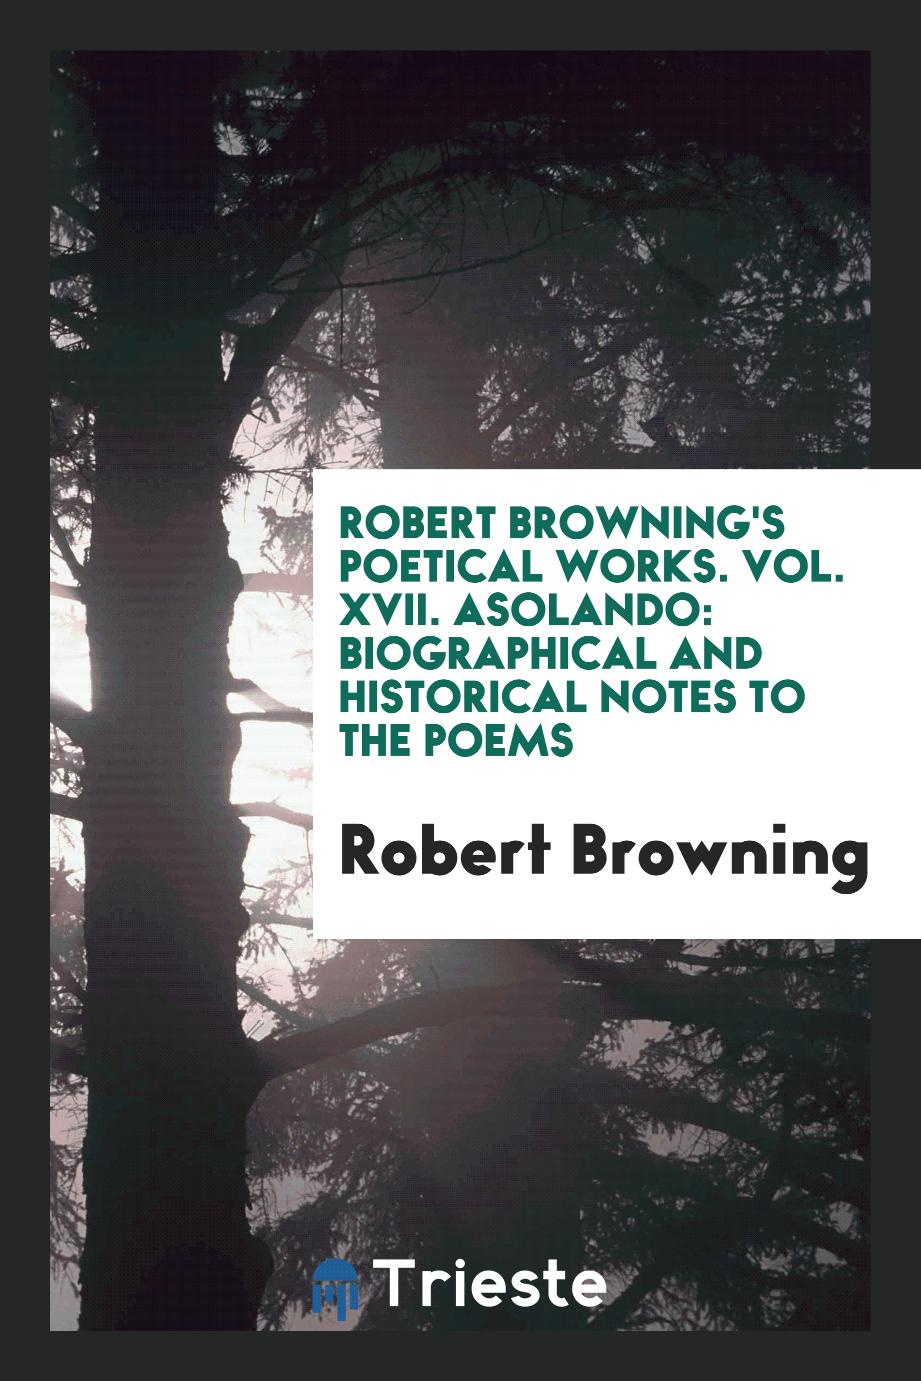 Robert Browning's Poetical Works. Vol. XVII. Asolando: Biographical and Historical Notes to the Poems